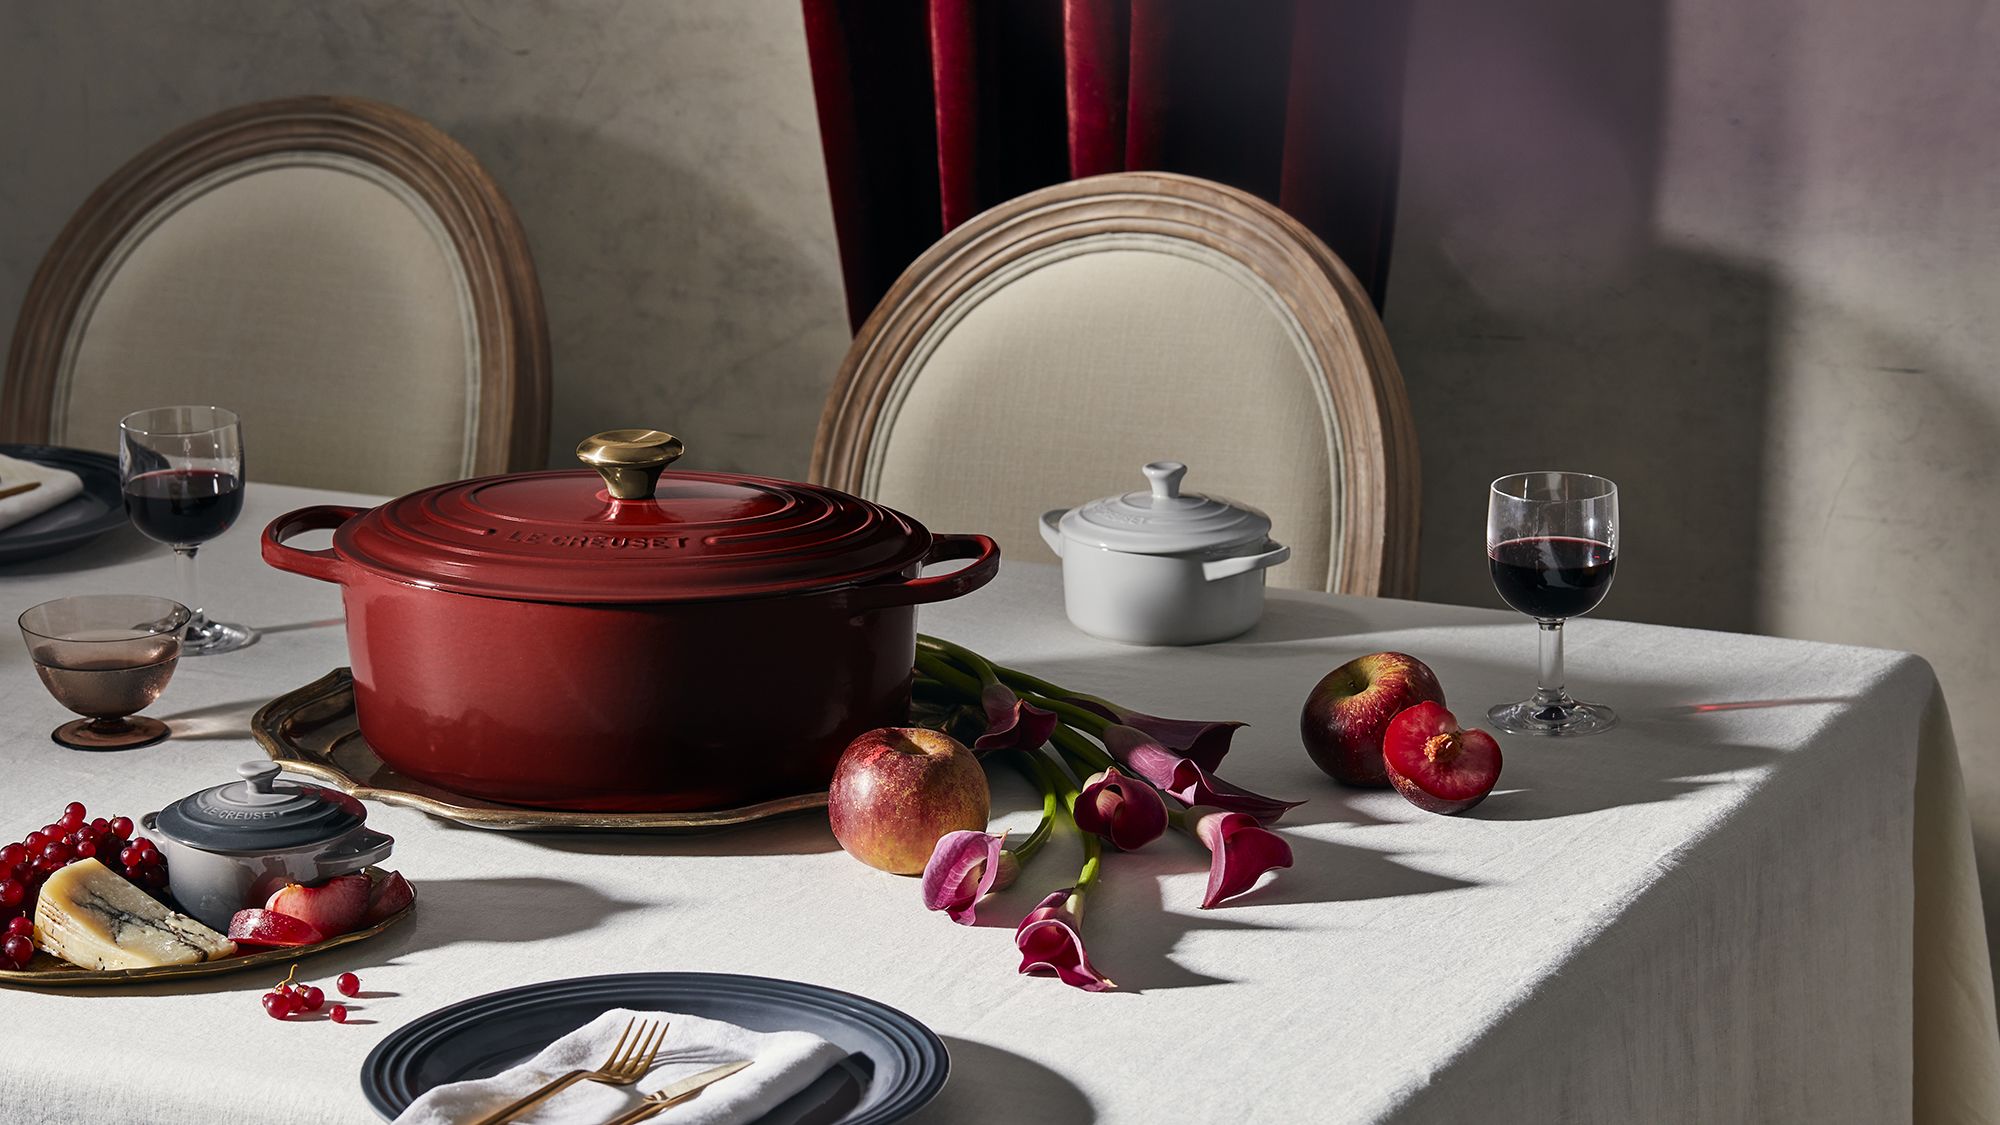 Le Creuset's Newest Color Collection Takes on the Moody Kitchen Trend